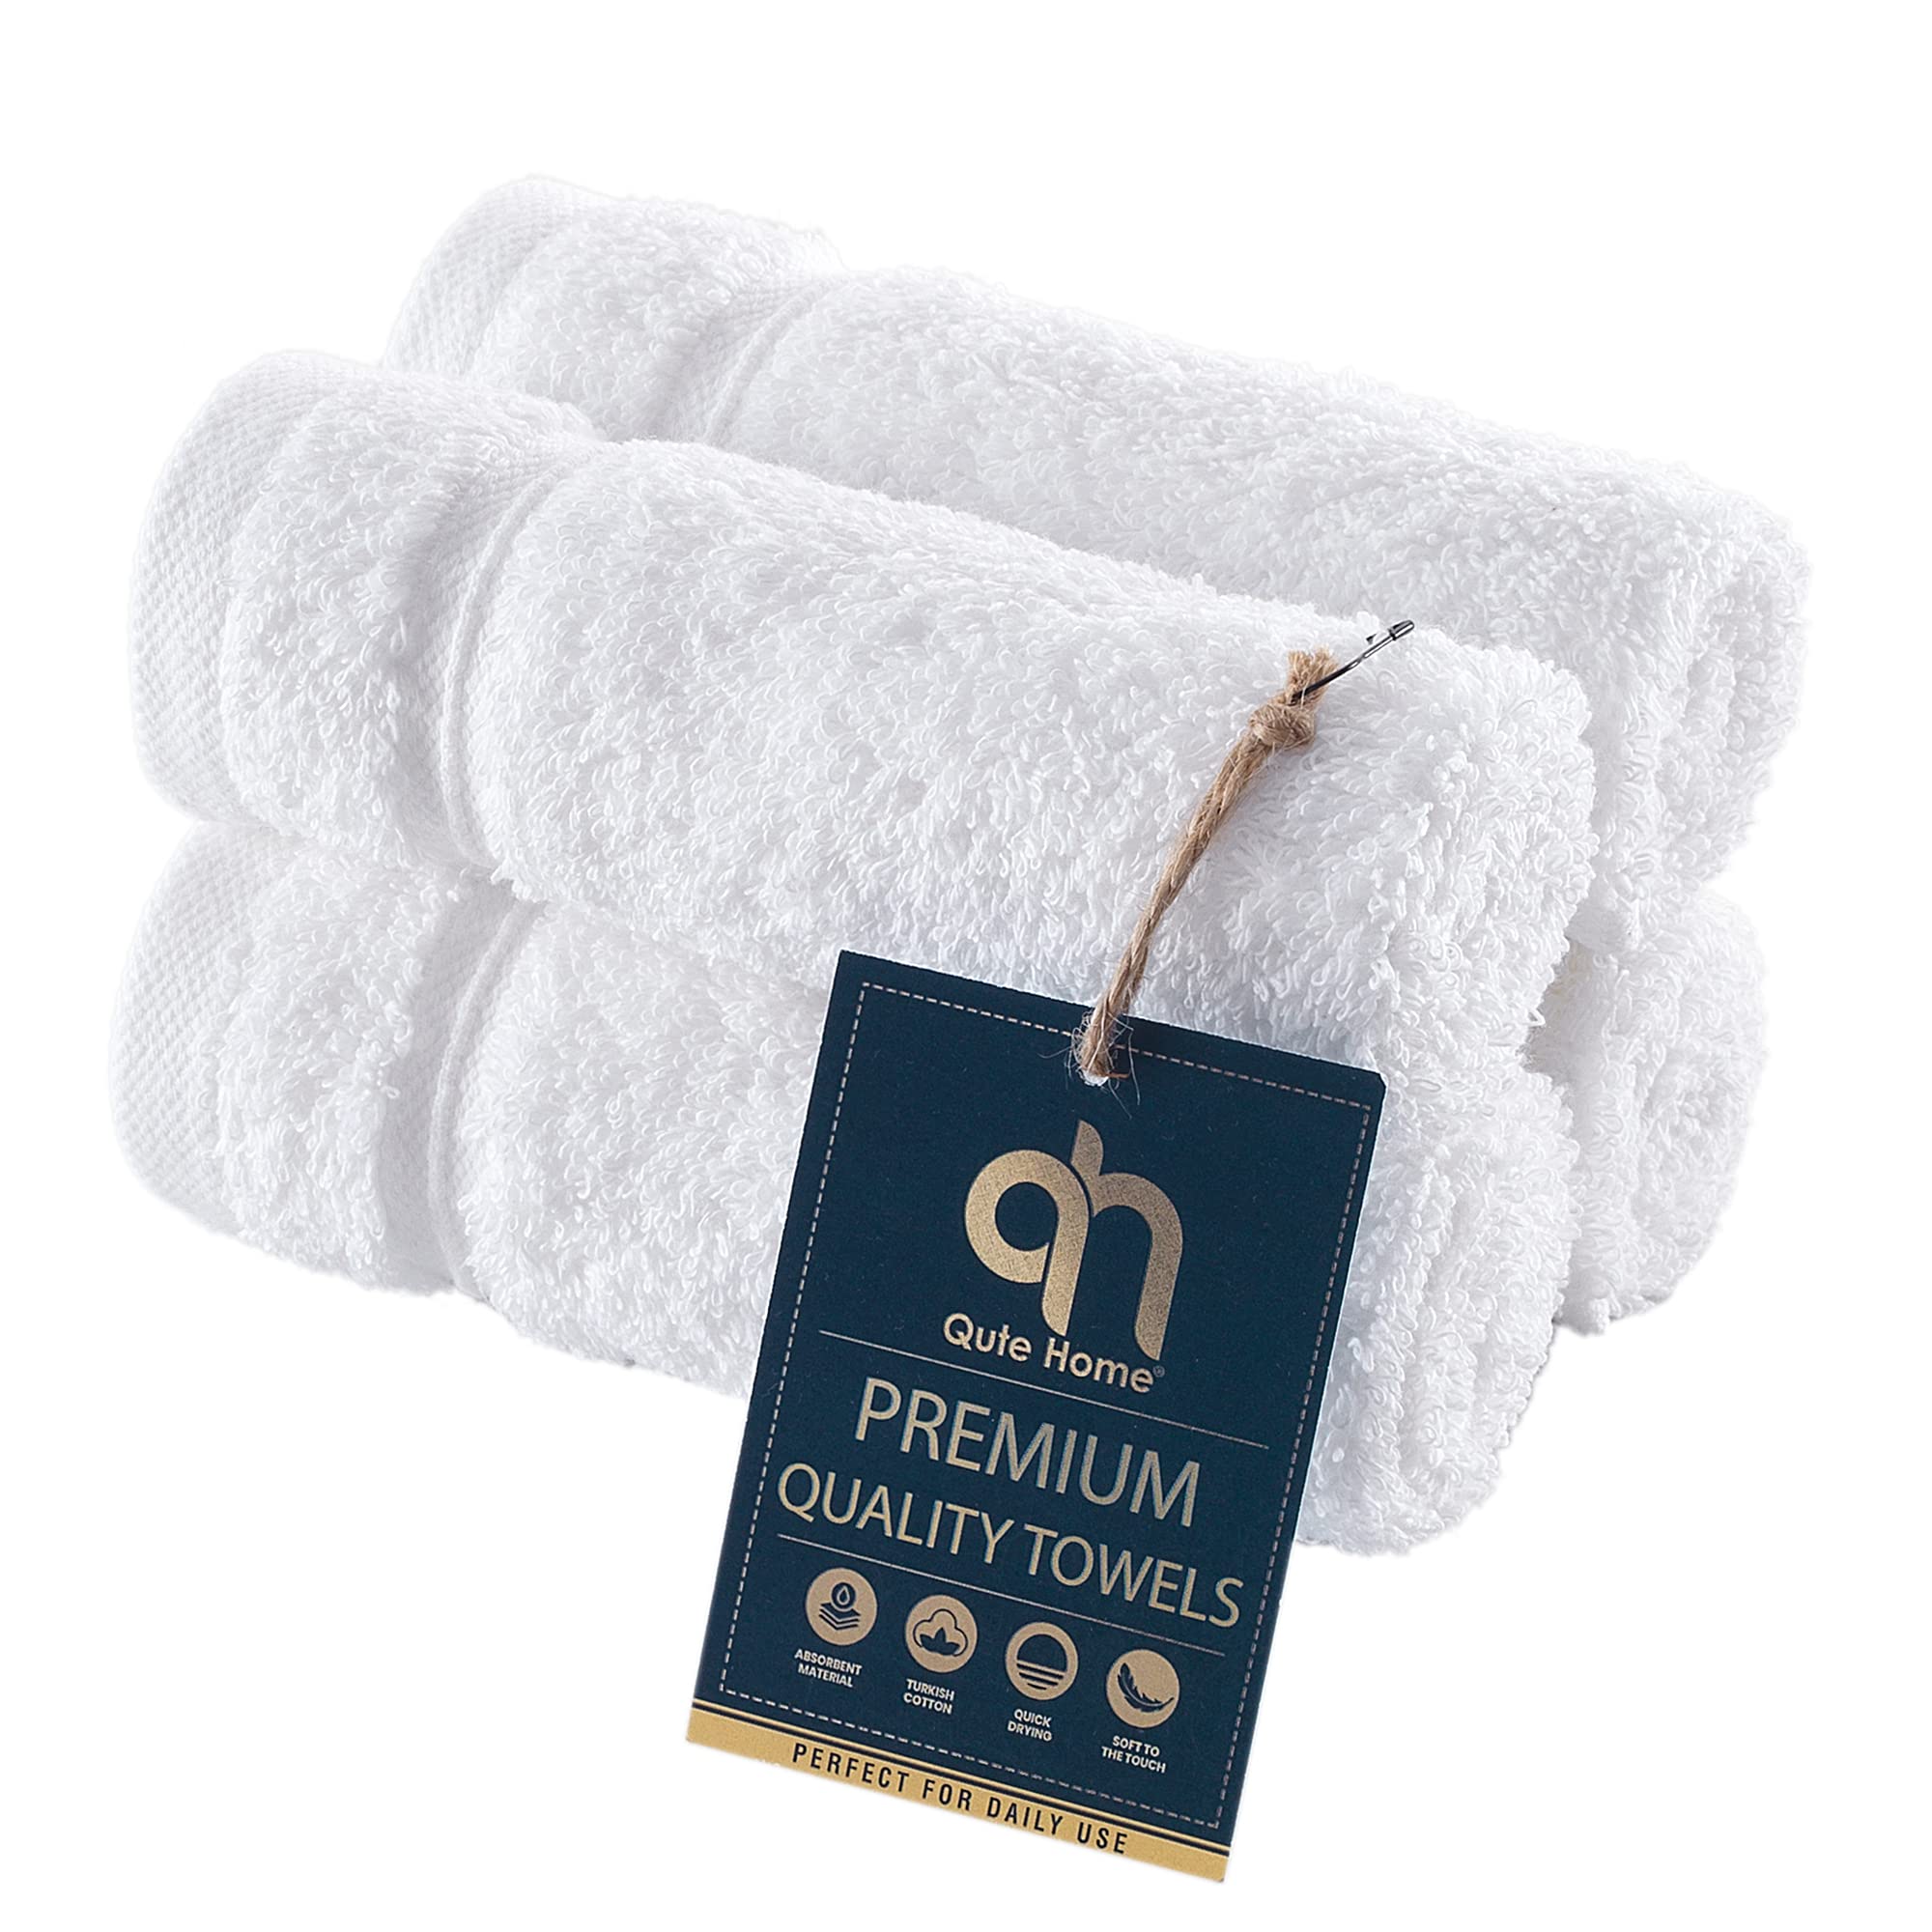 Qute Home 4-Piece Washcloths Towels Set, 100% Turkish Cotton Premium  Quality Towels for Bathroom, Quick Dry Soft and Absorbent Turkish Towel, Set  Includes 4 Wash Cloths (White) 4 Pieces Washcloths White